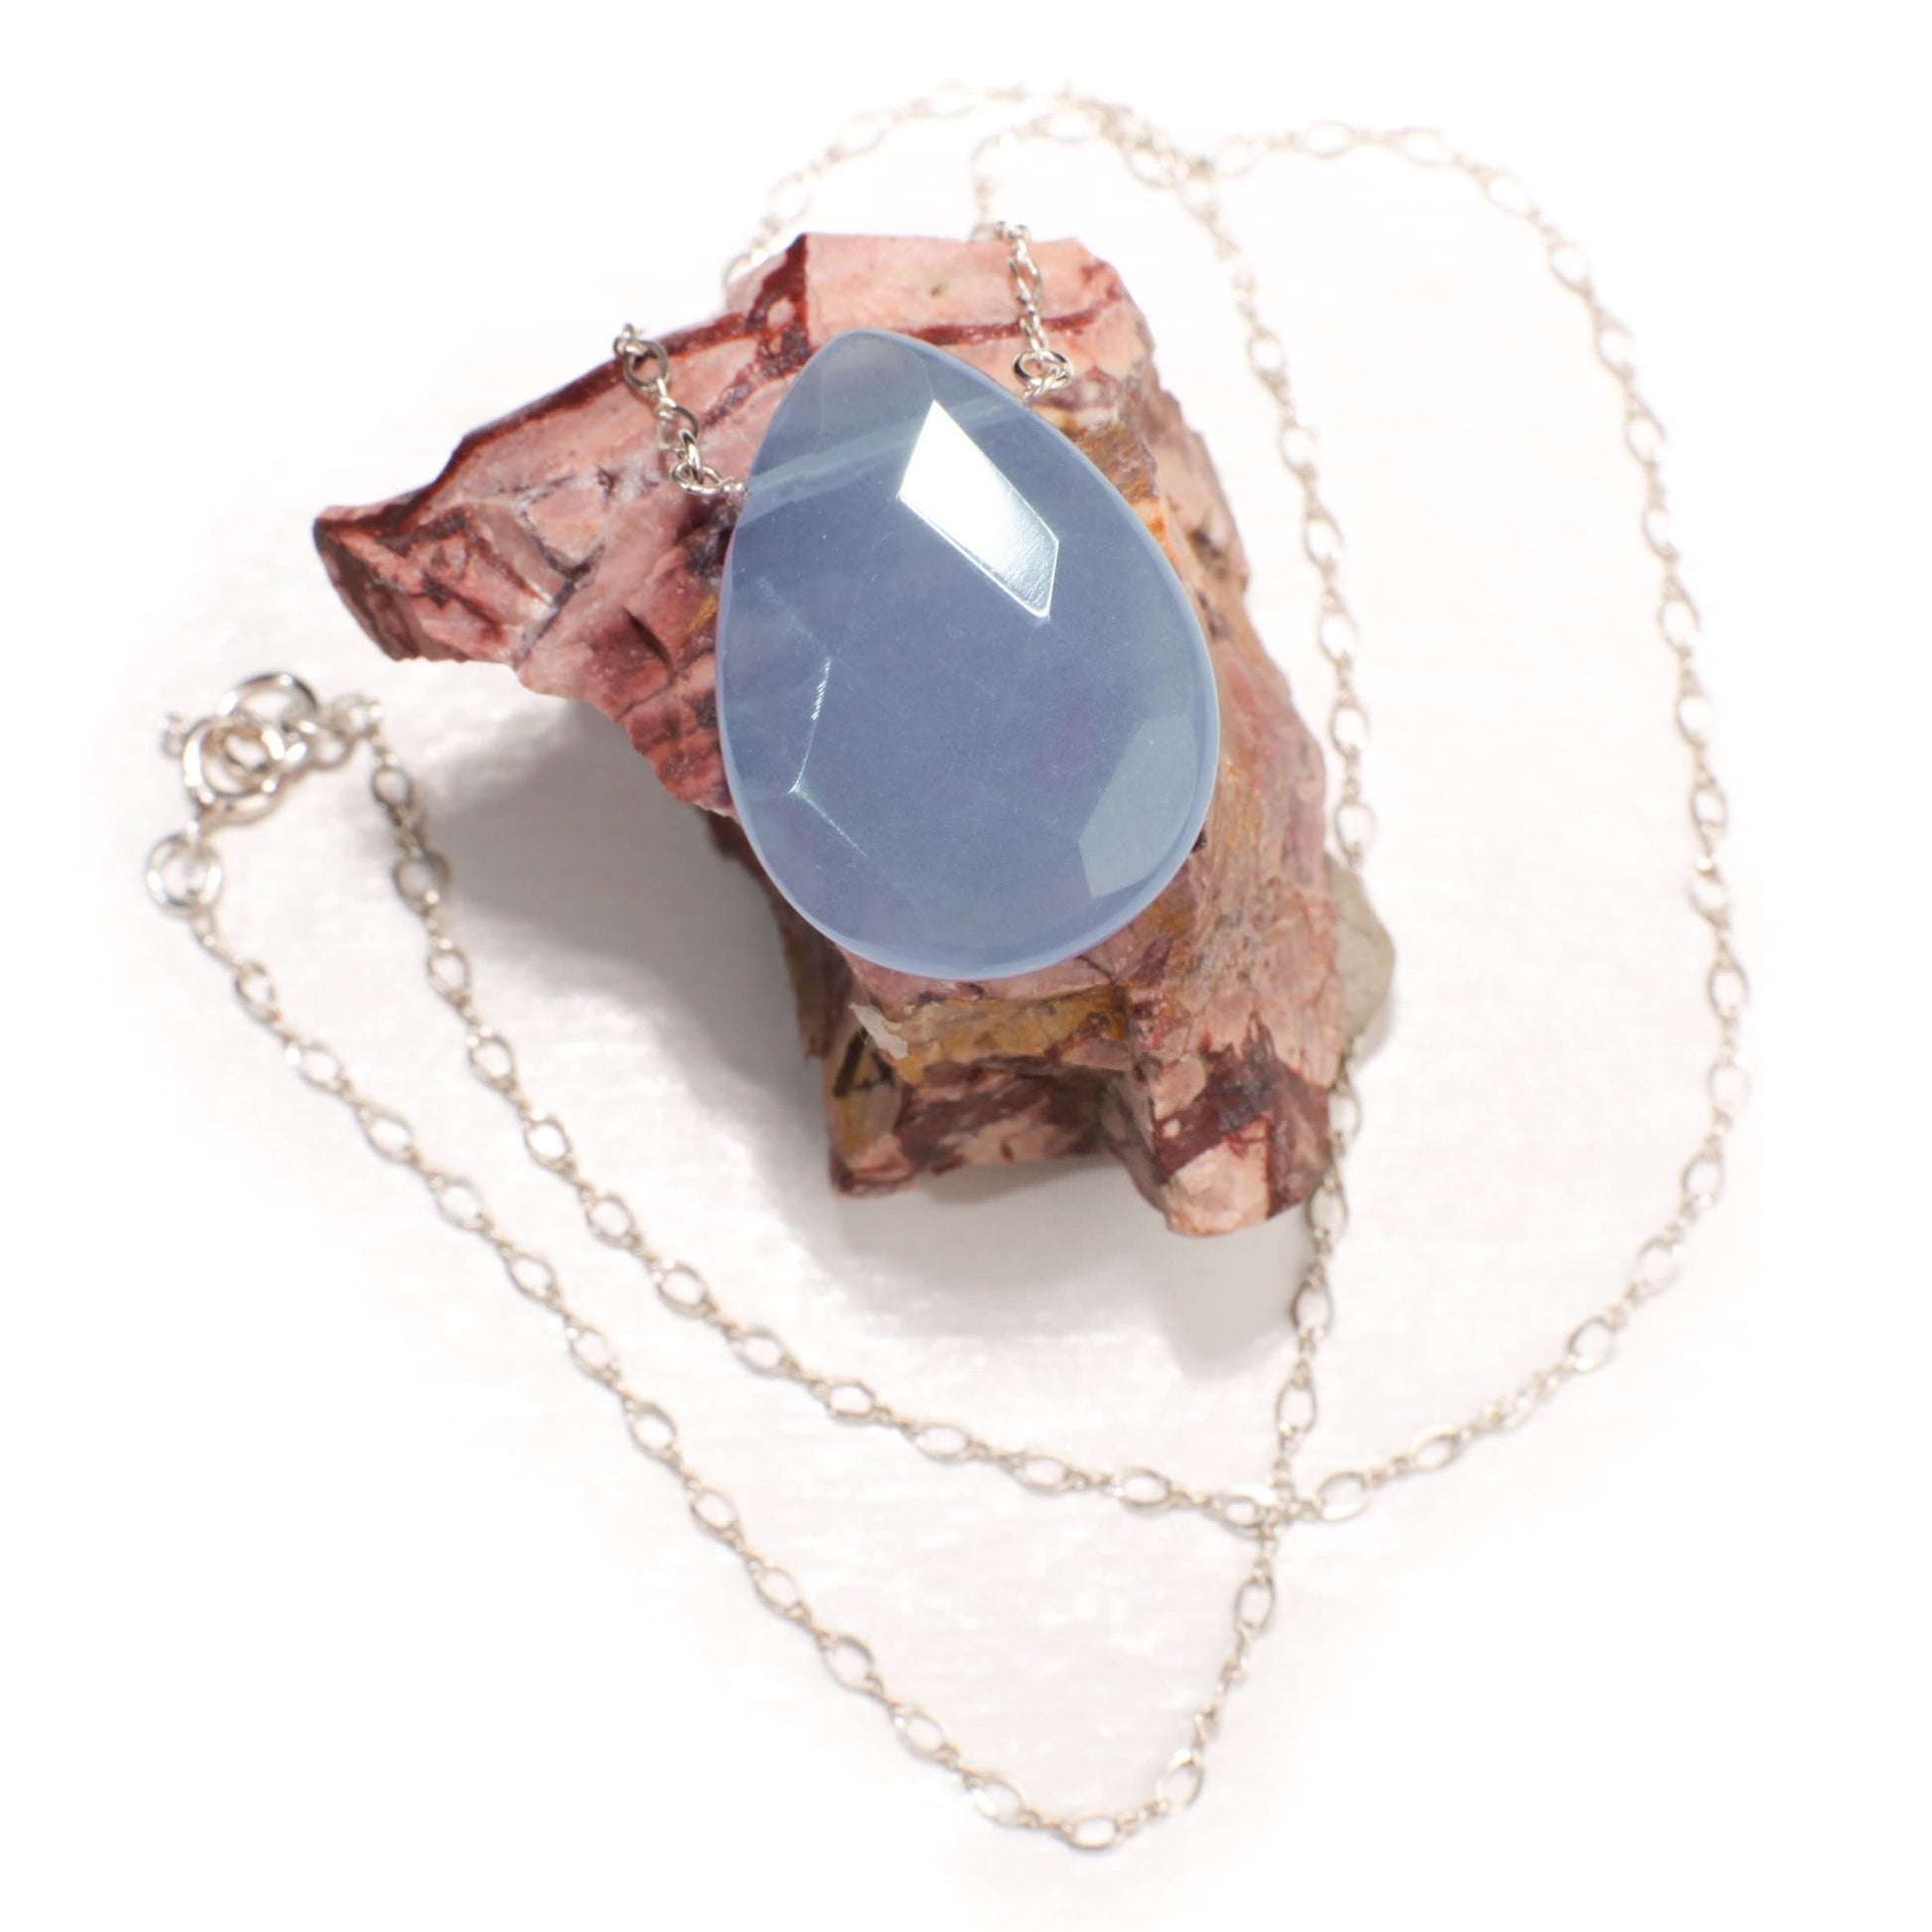 Chalcedony Faceted large Pear Drop 22x30mm, Natural Gemstones in 925 Sterling Silver Chain or 14K Gold Filled Chain